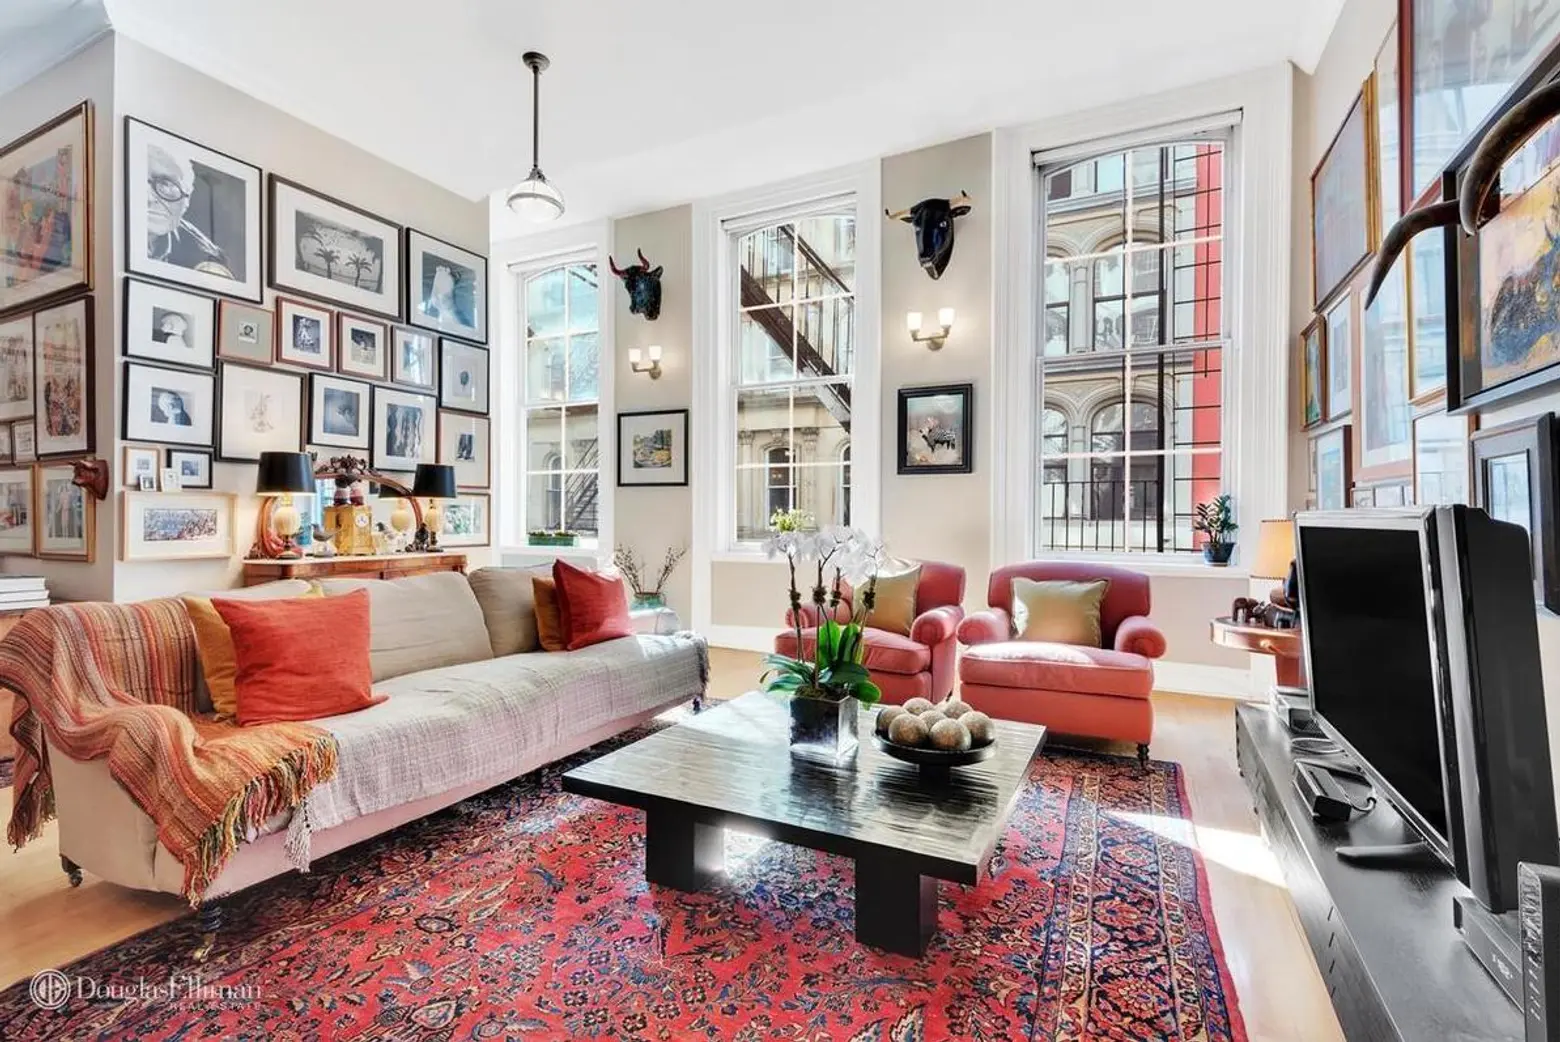 $3M Tribeca loft has the elegance of old New York in a 21st century condo